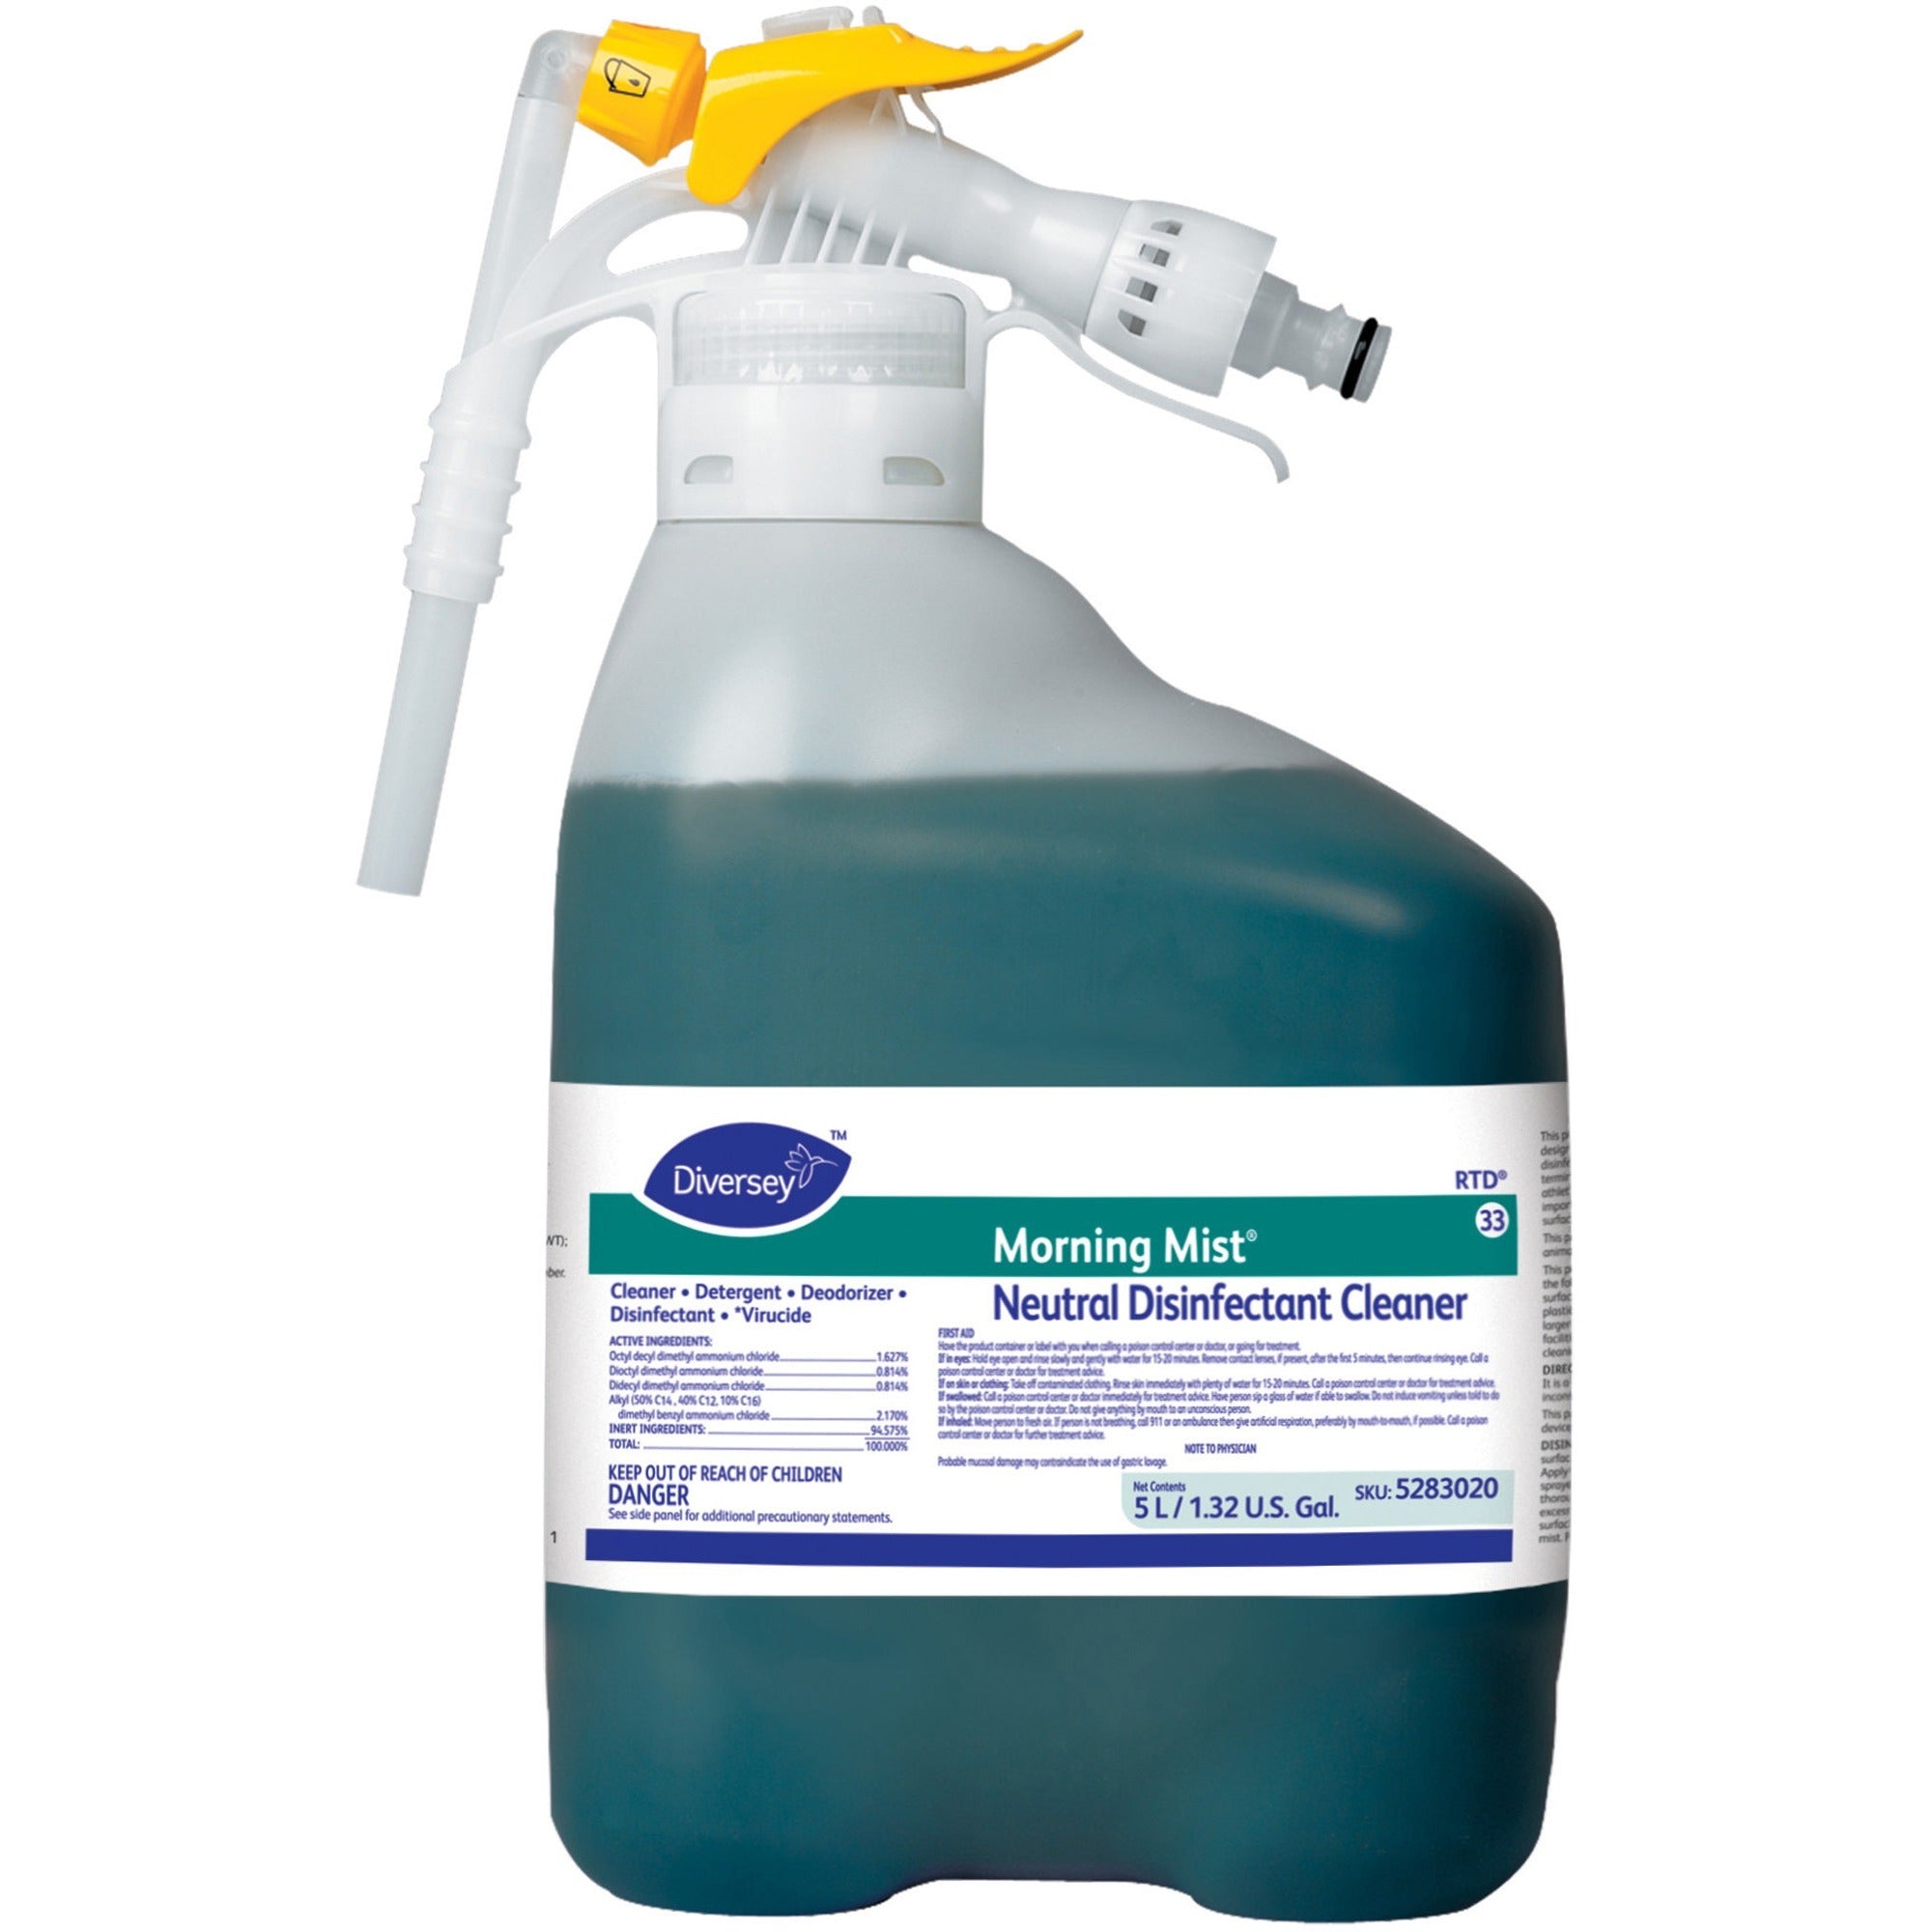 diversey-quaternary-disinfectant-cleaner-ready-to-use-169-fl-oz-53-quart-fresh-scent-1-each-deodorize-blue-green_dvo5283020 - 1